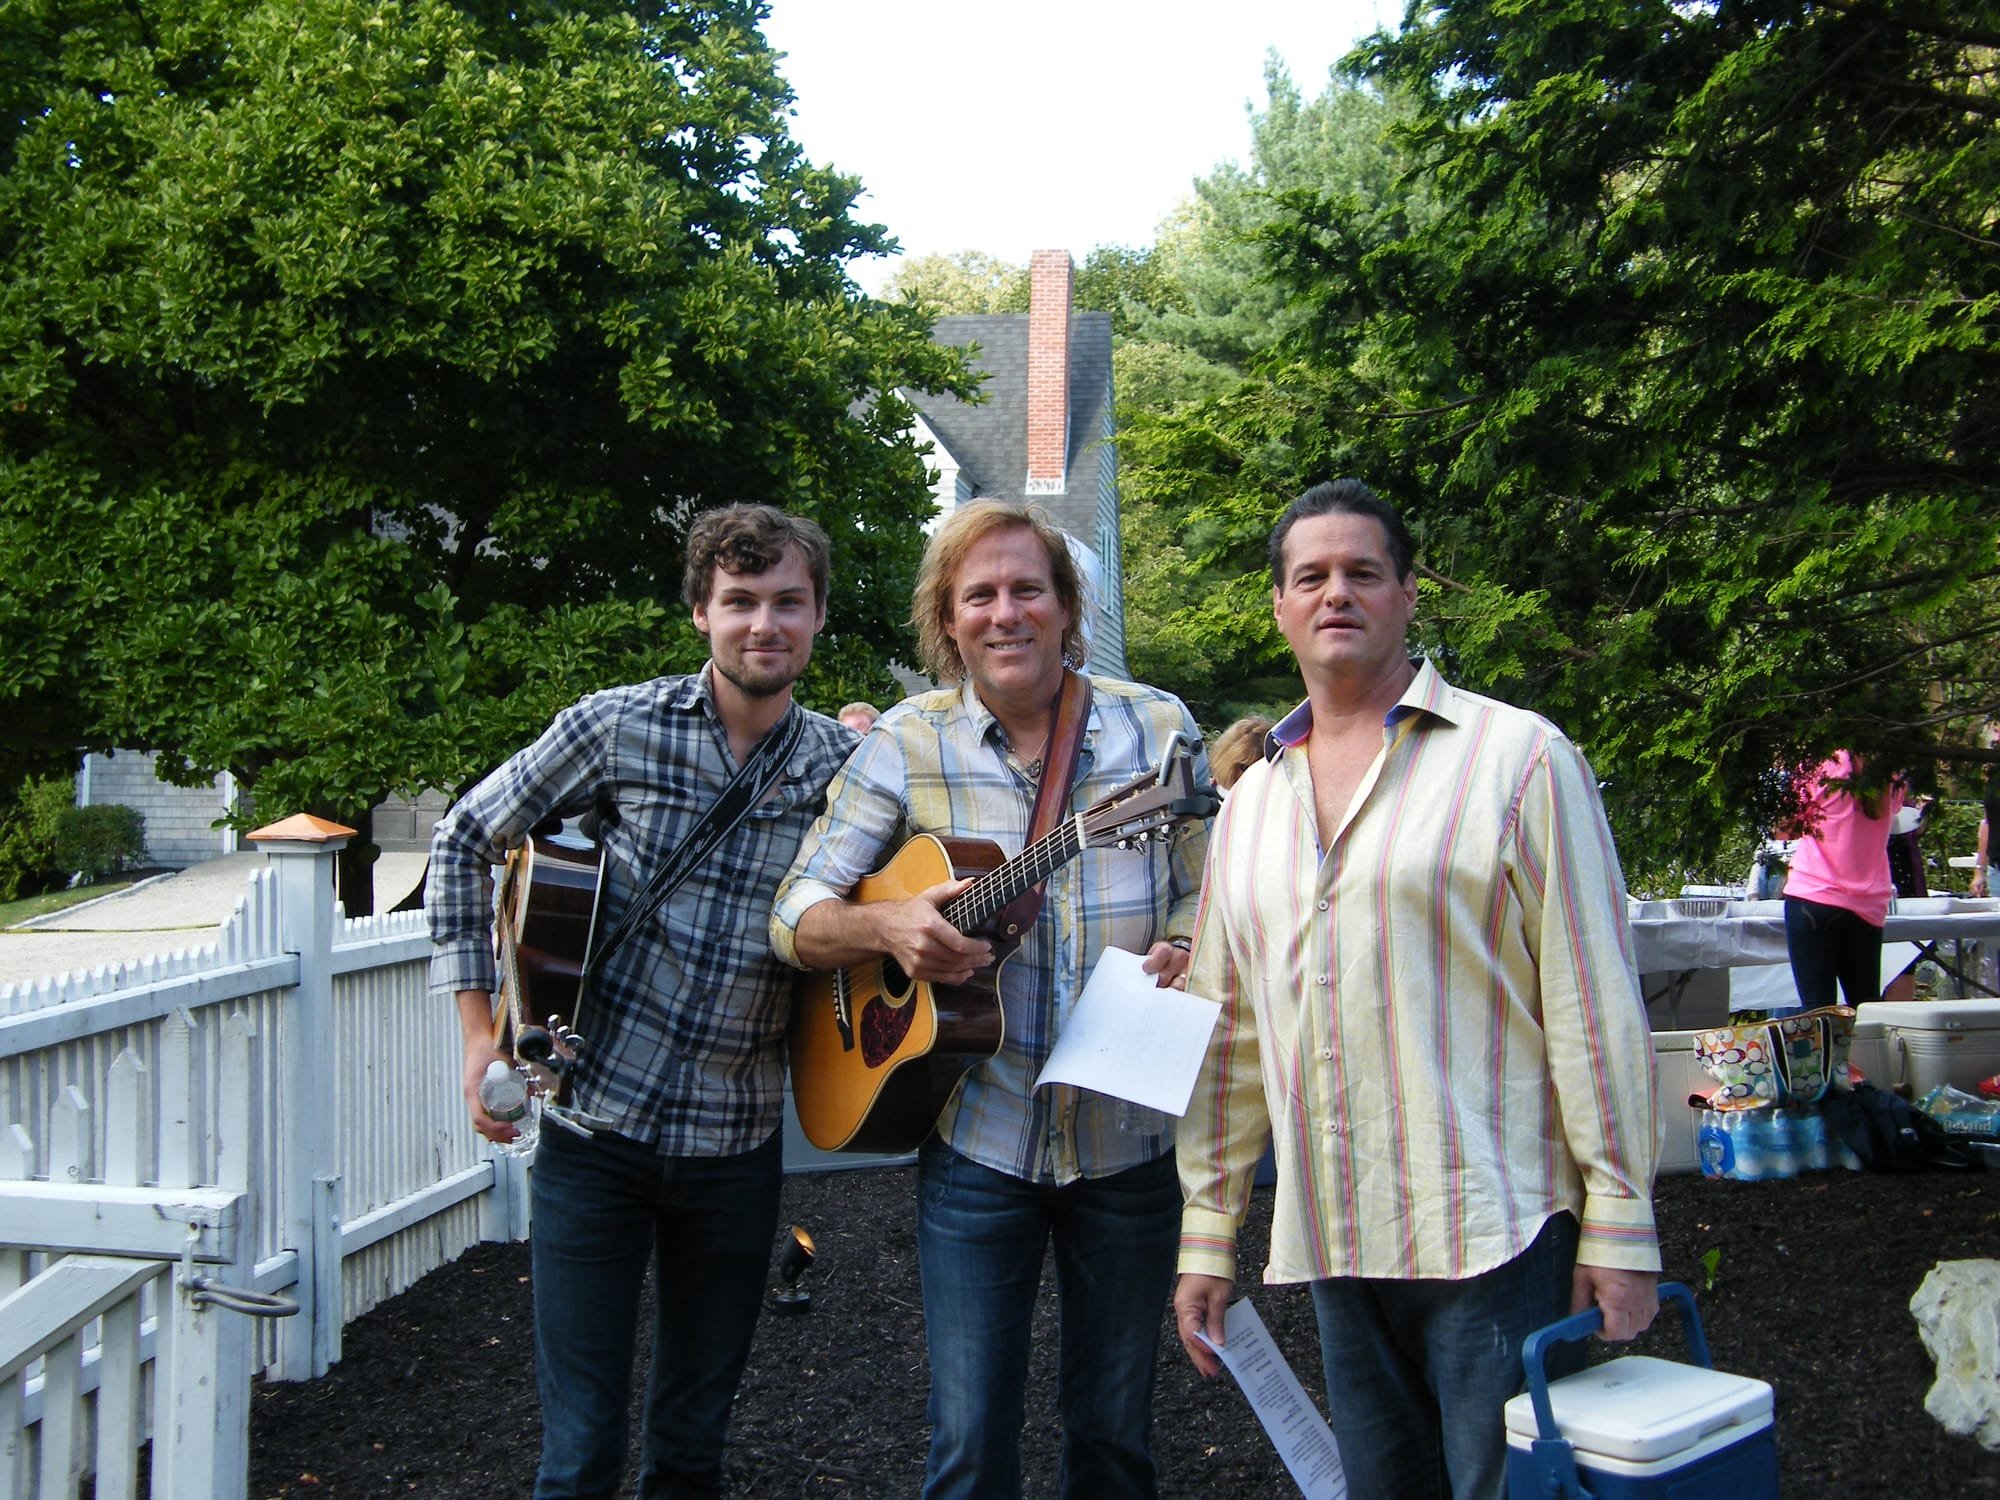 Patriot Ledger- Brendan Mayer, Peter Mayer and Jon Frattasio as a trio at a sold-out outdoor concert in Hanover MA.